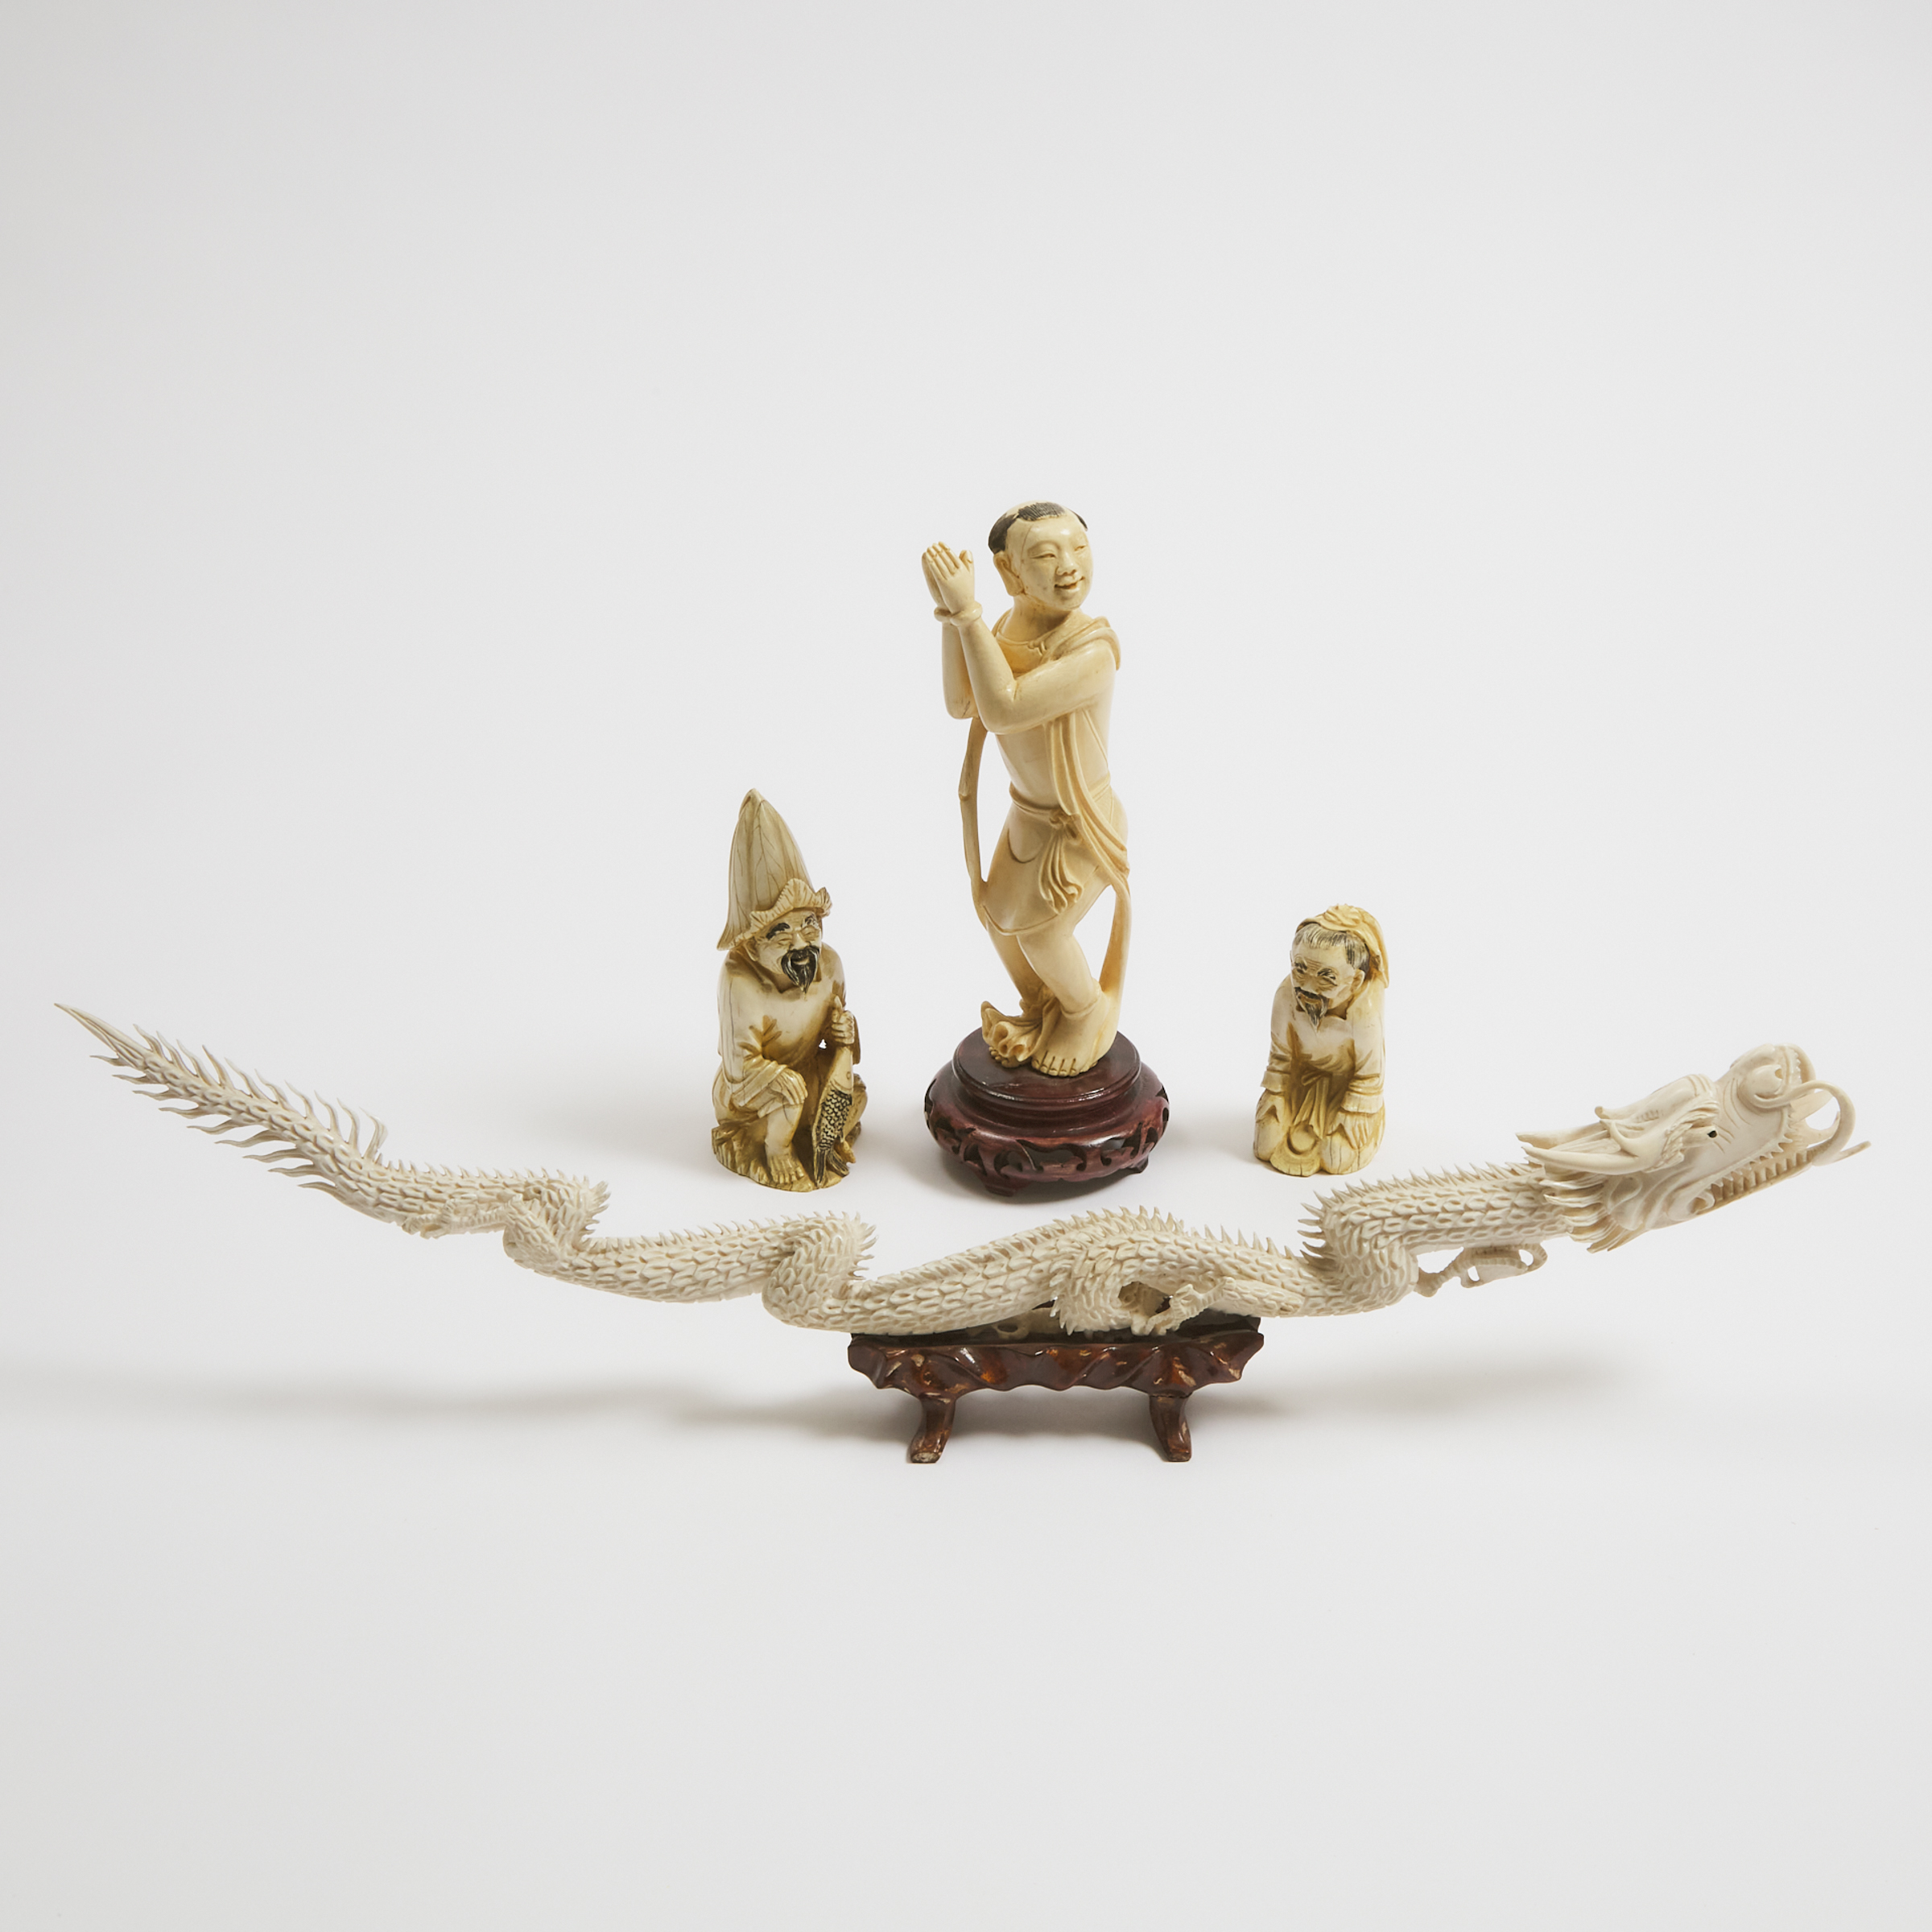 A Group of Four Ivory Carvings, 19th/20th Century